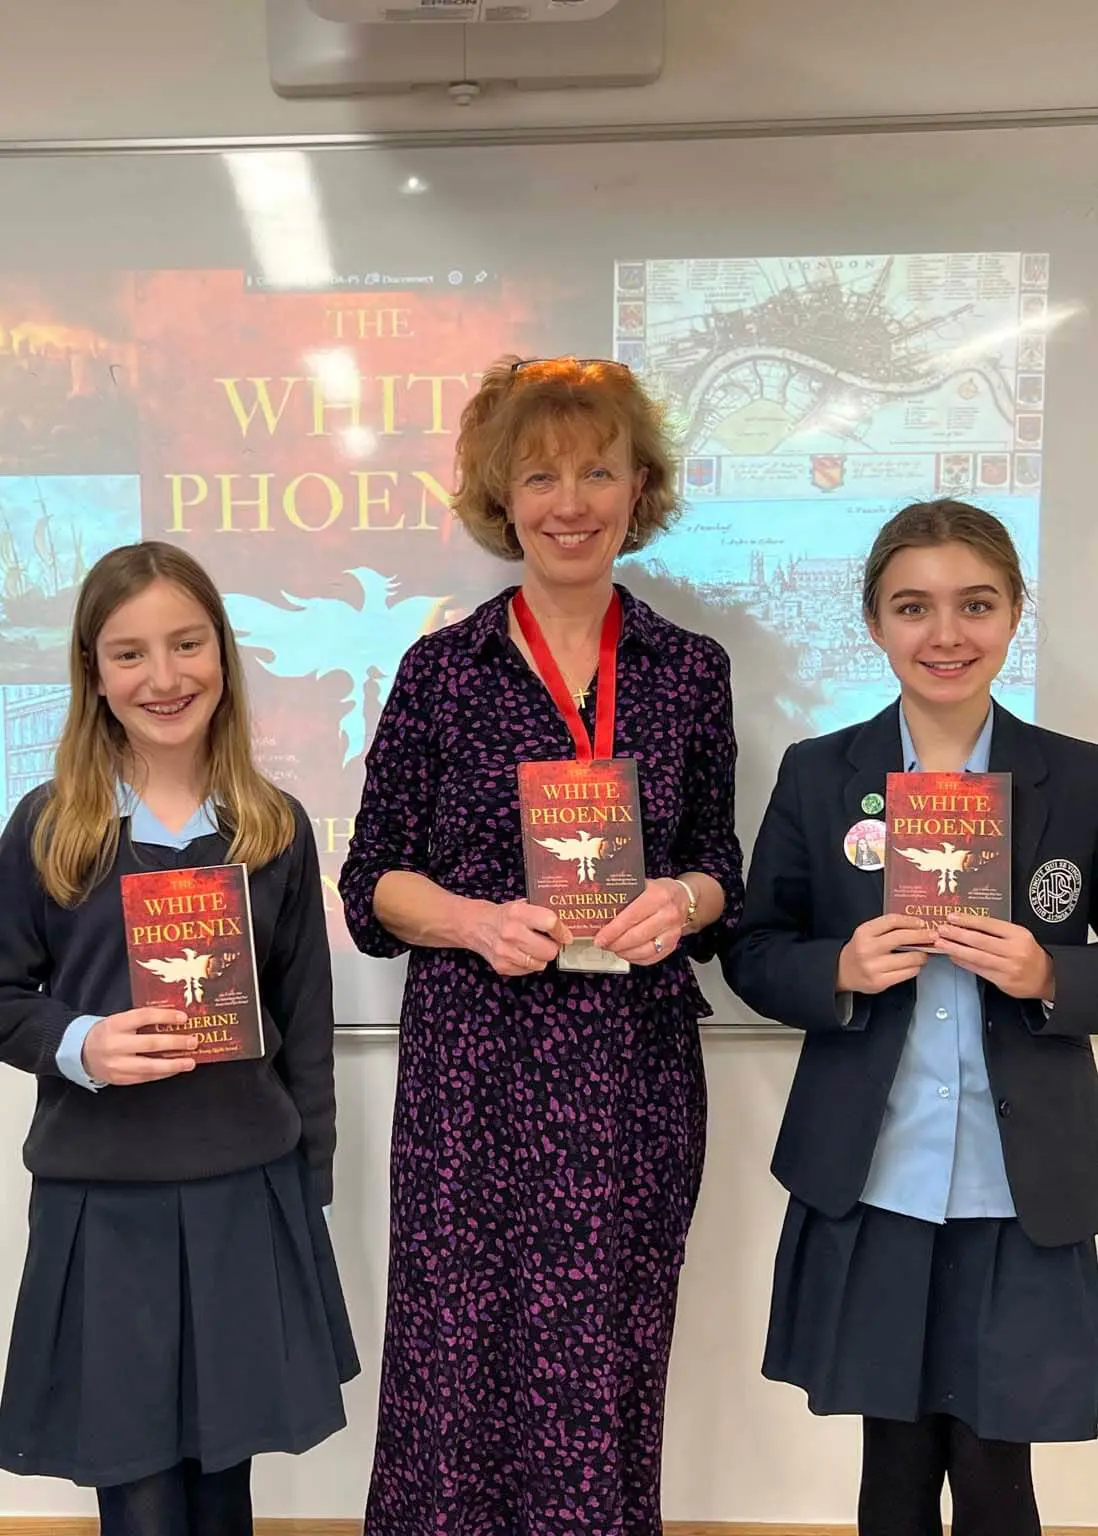 Pupils standing with Catherine Randall with her books in their hands.